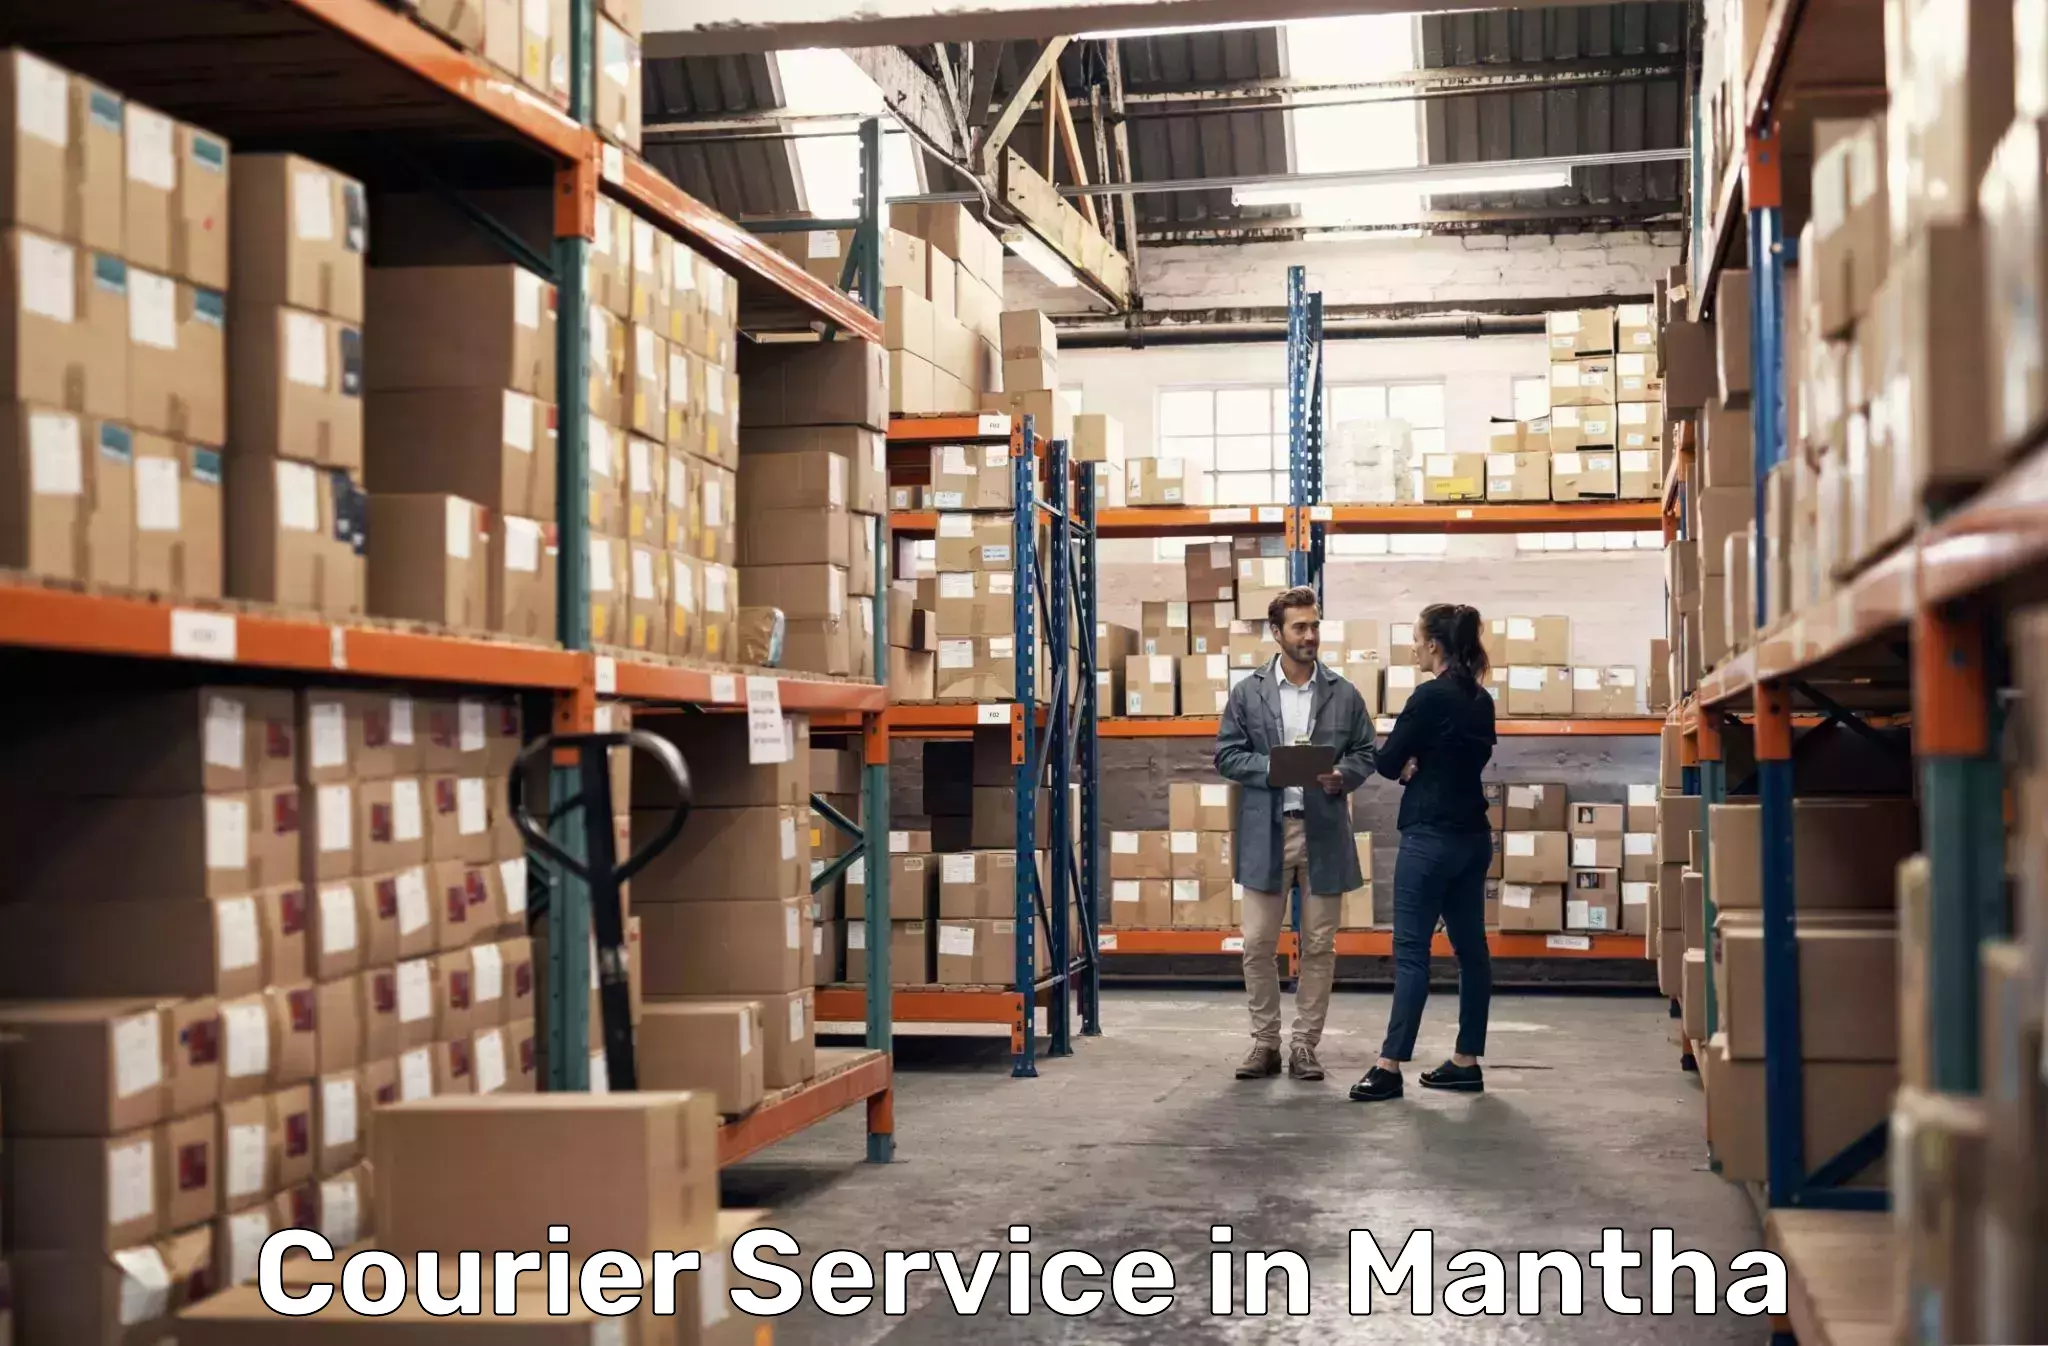 Secure freight services in Mantha